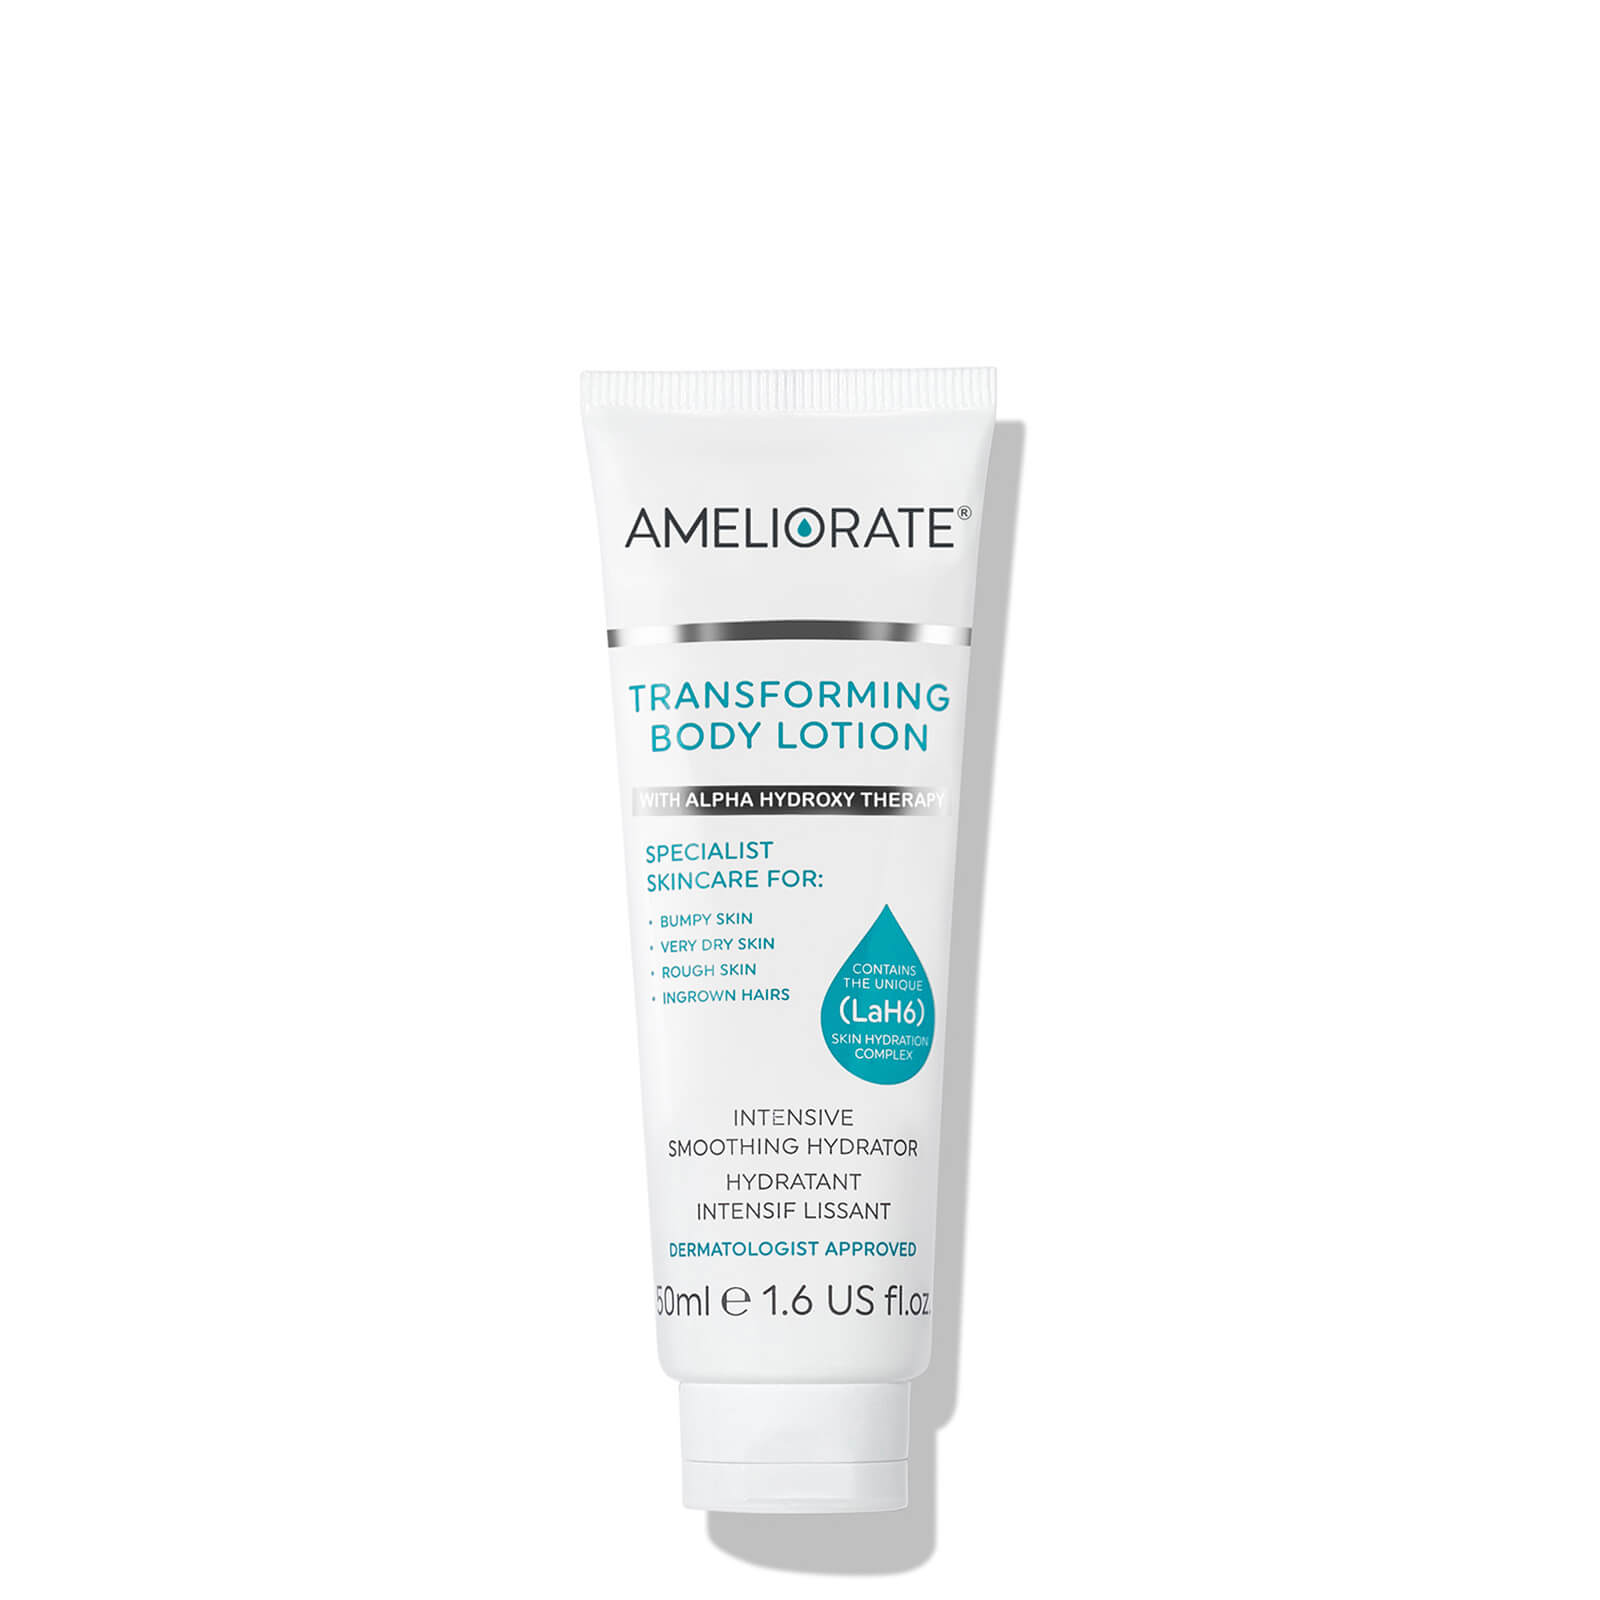 Image of AMELIORATE Transforming Body Lotion - 50ml